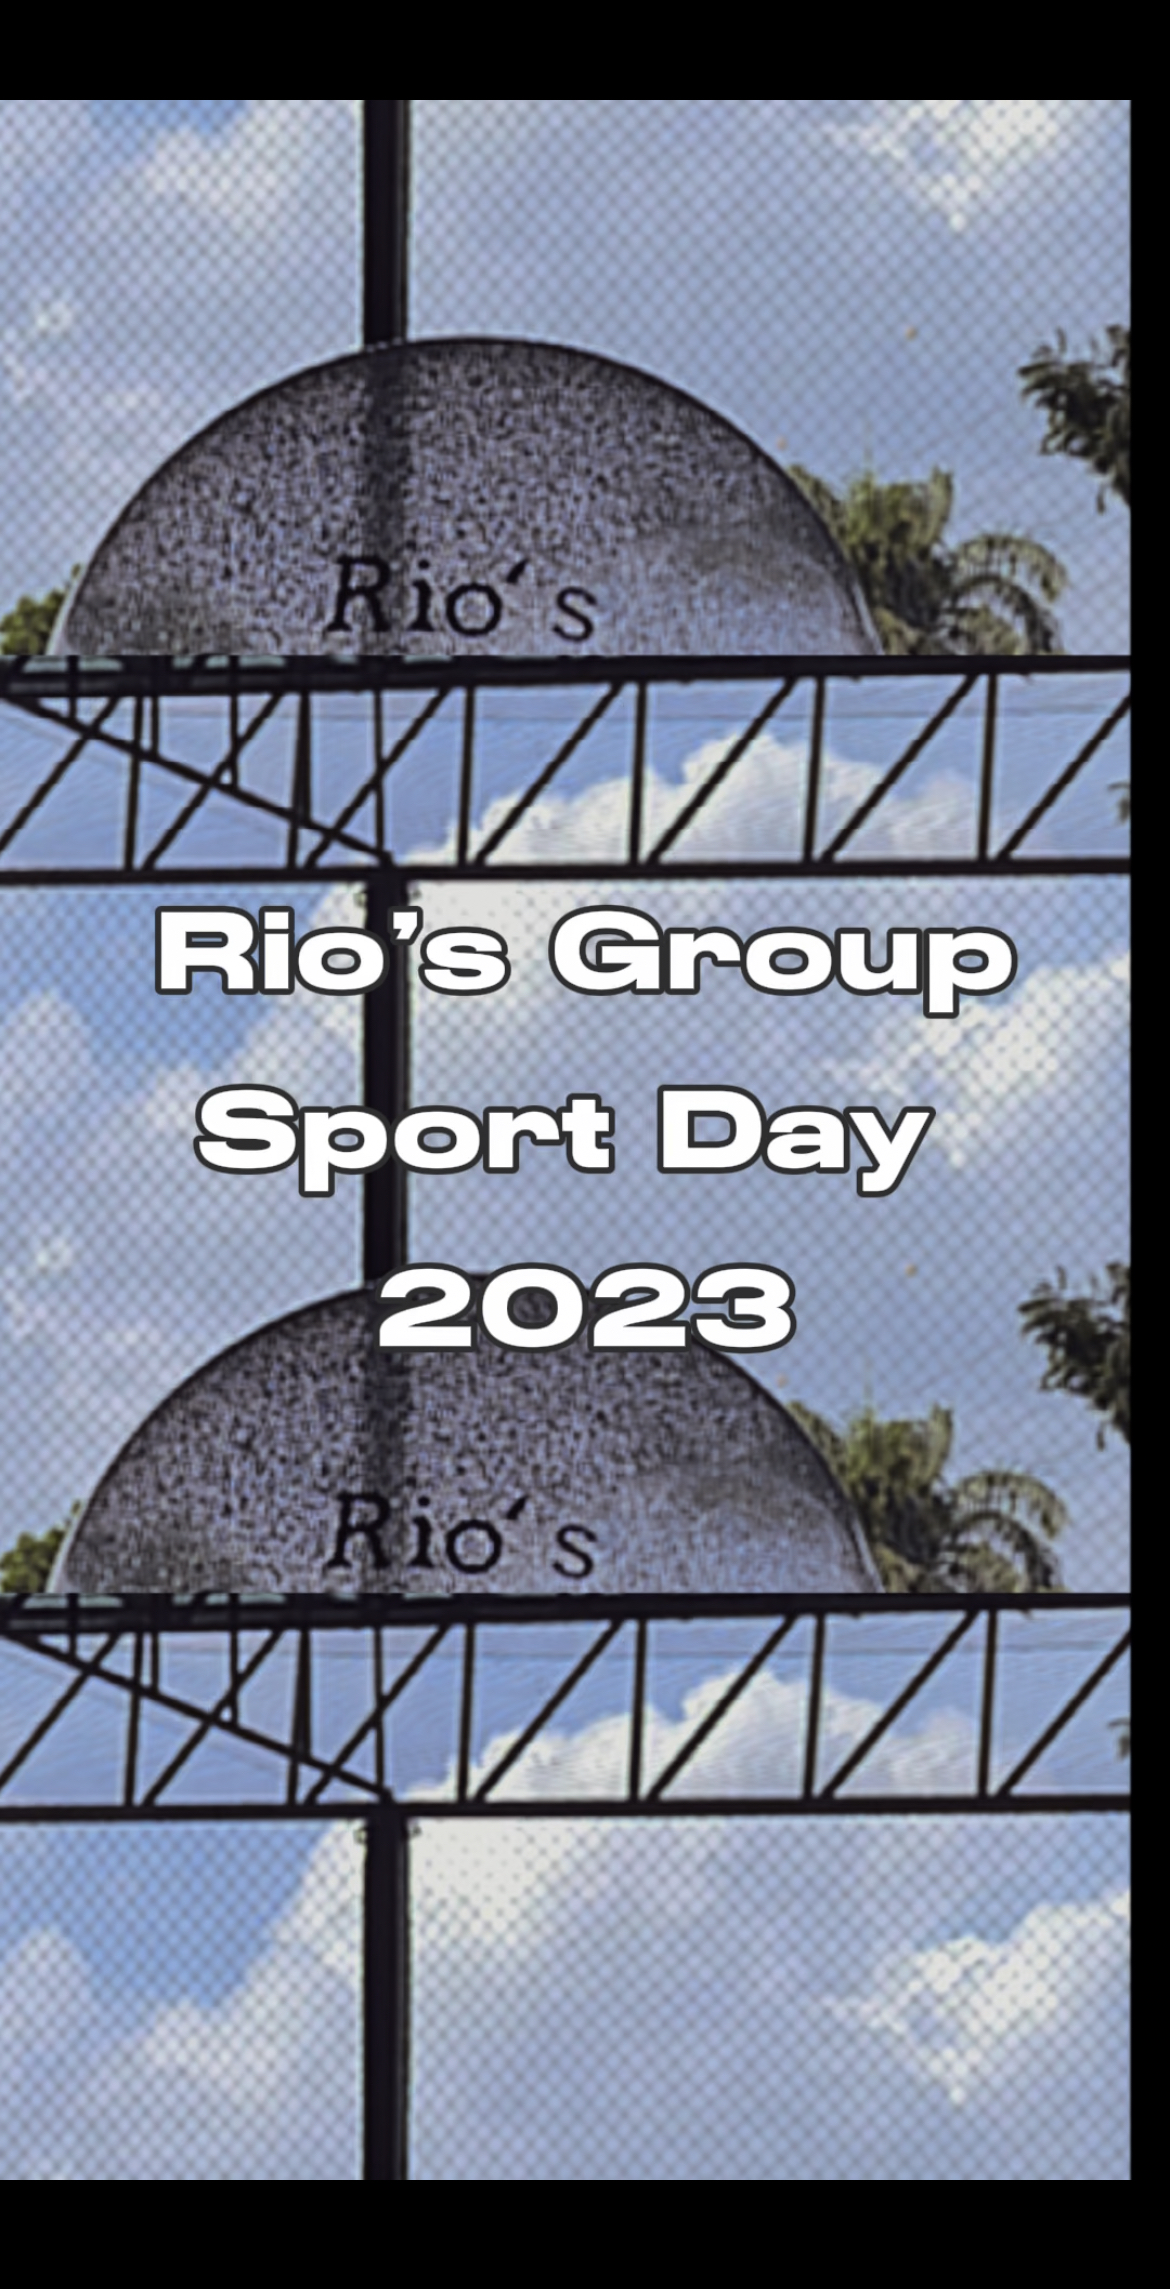 (TH) Rio's group sport day 2023 🏆 By Rio's group